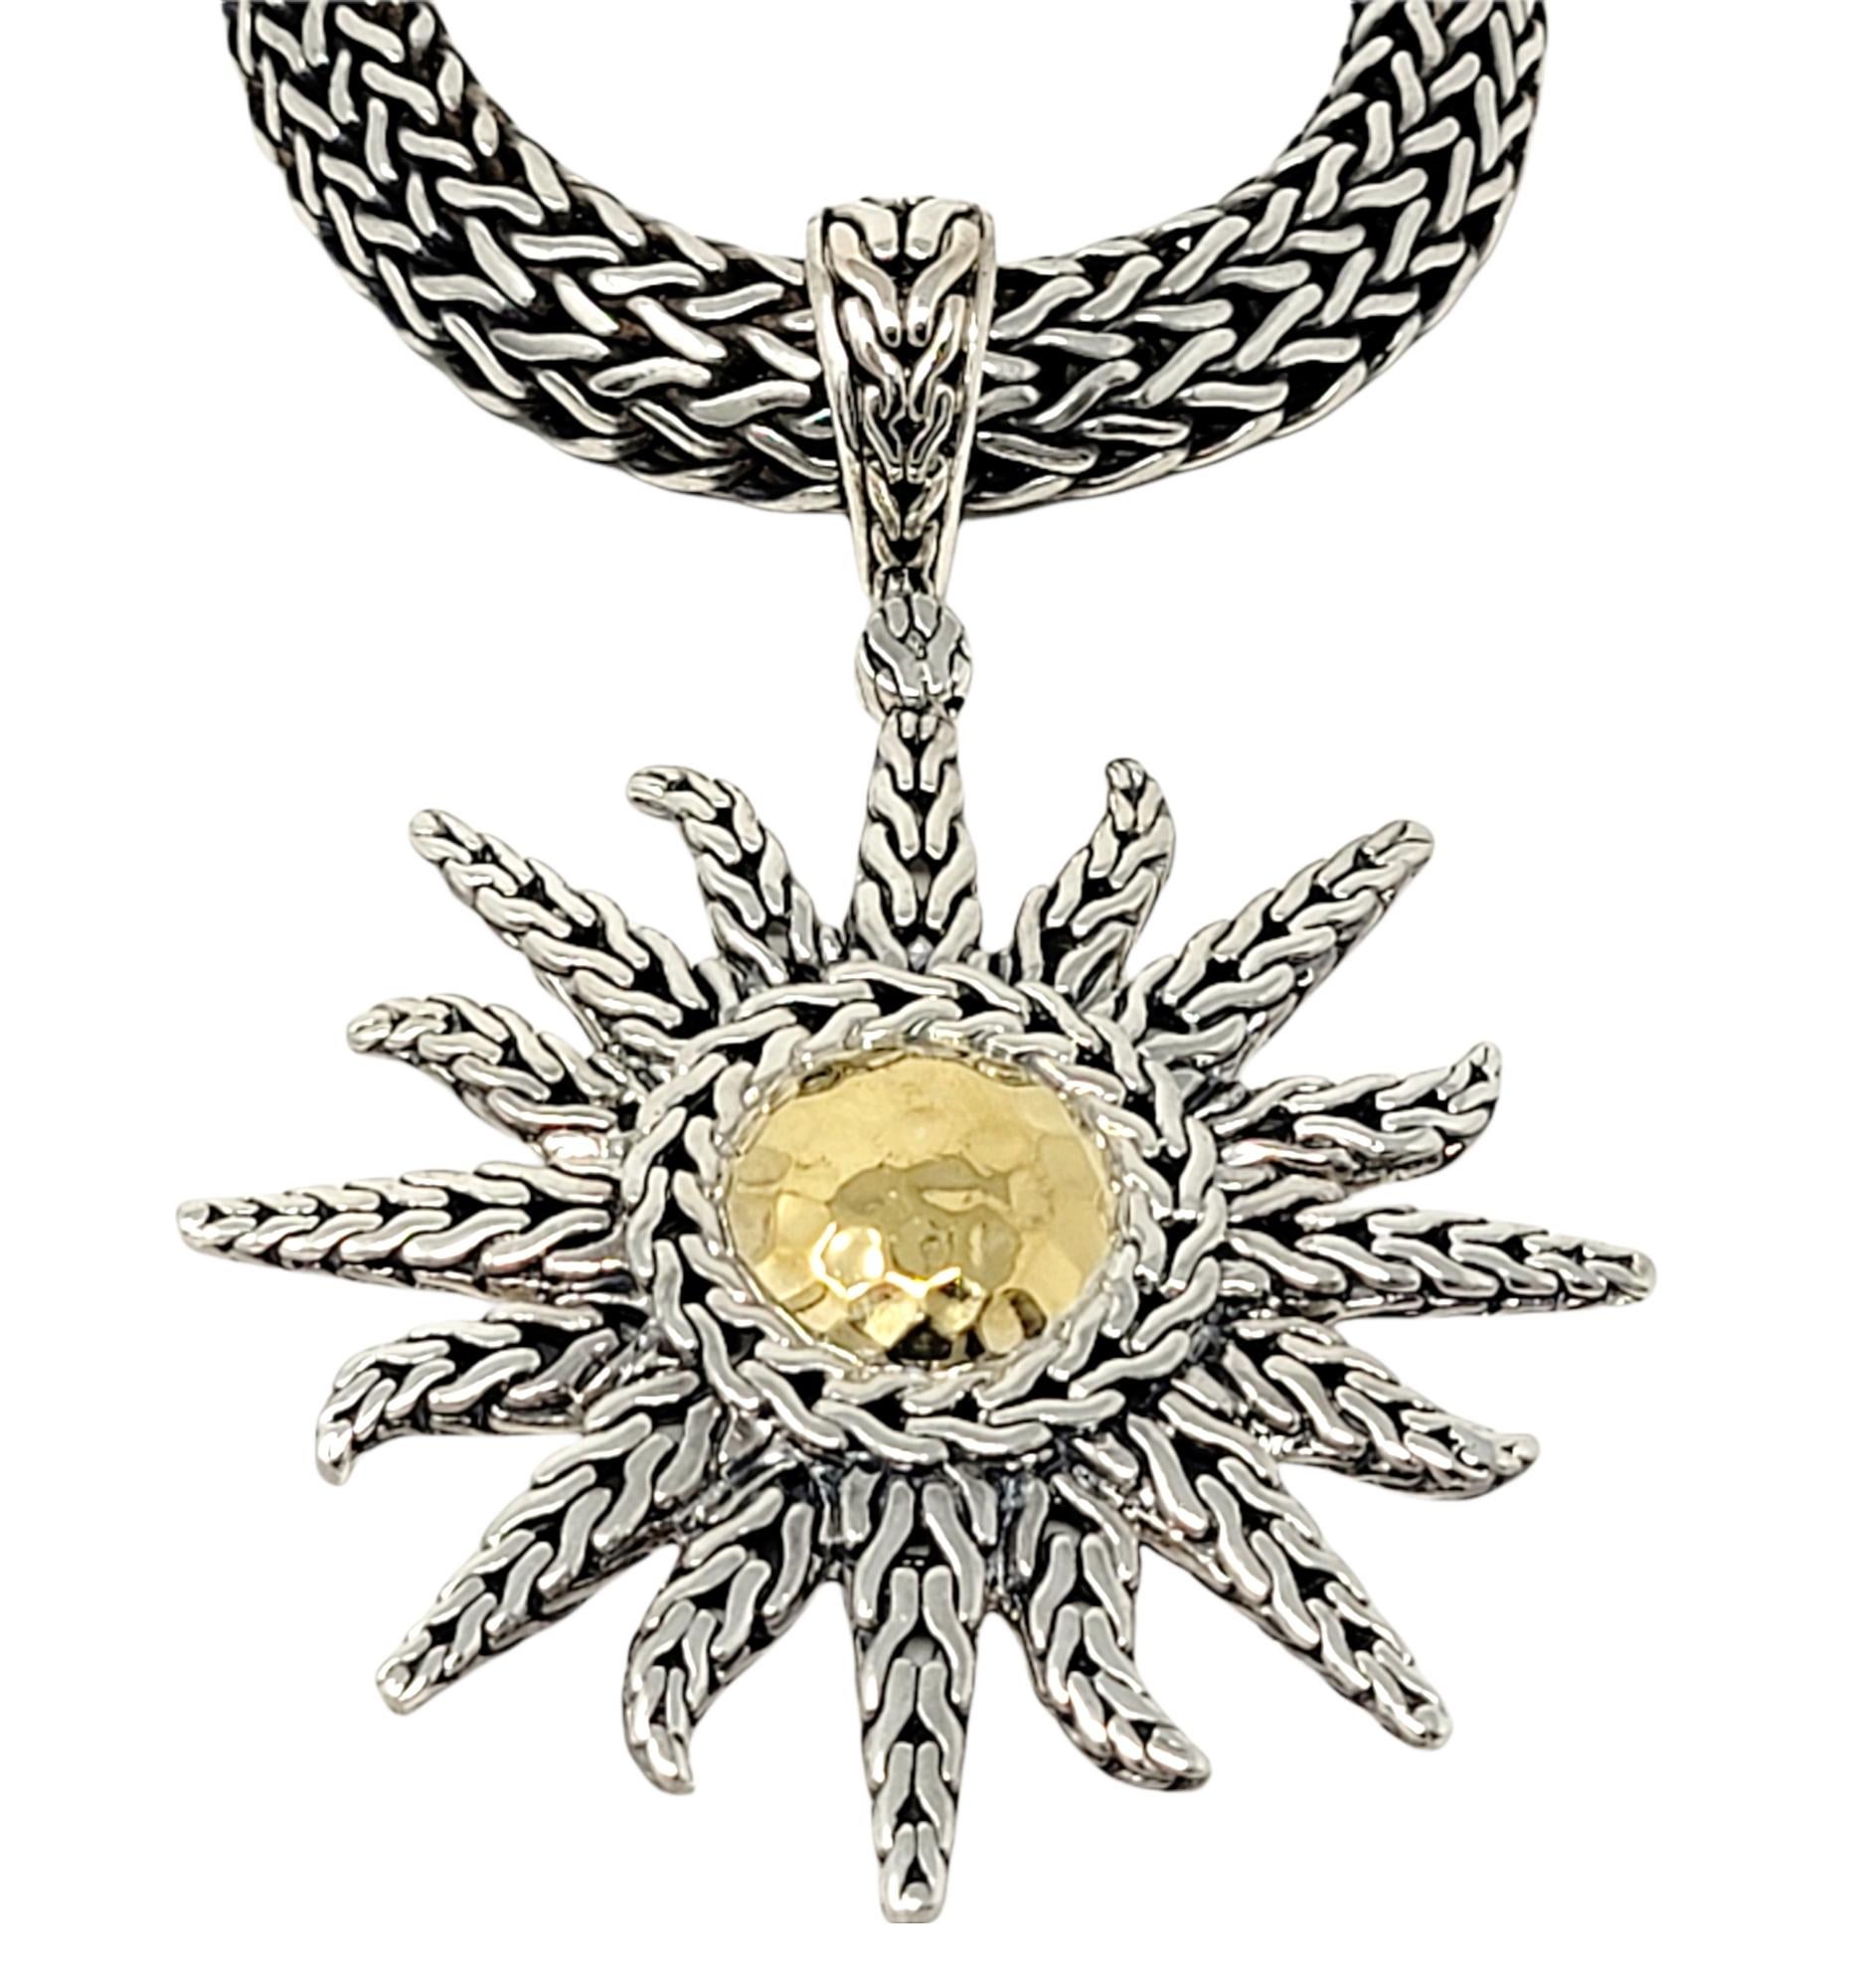 Women's John Hardy Two-Tone Hammered Sun Pendant Necklace in Sterling and 22 Karat Gold